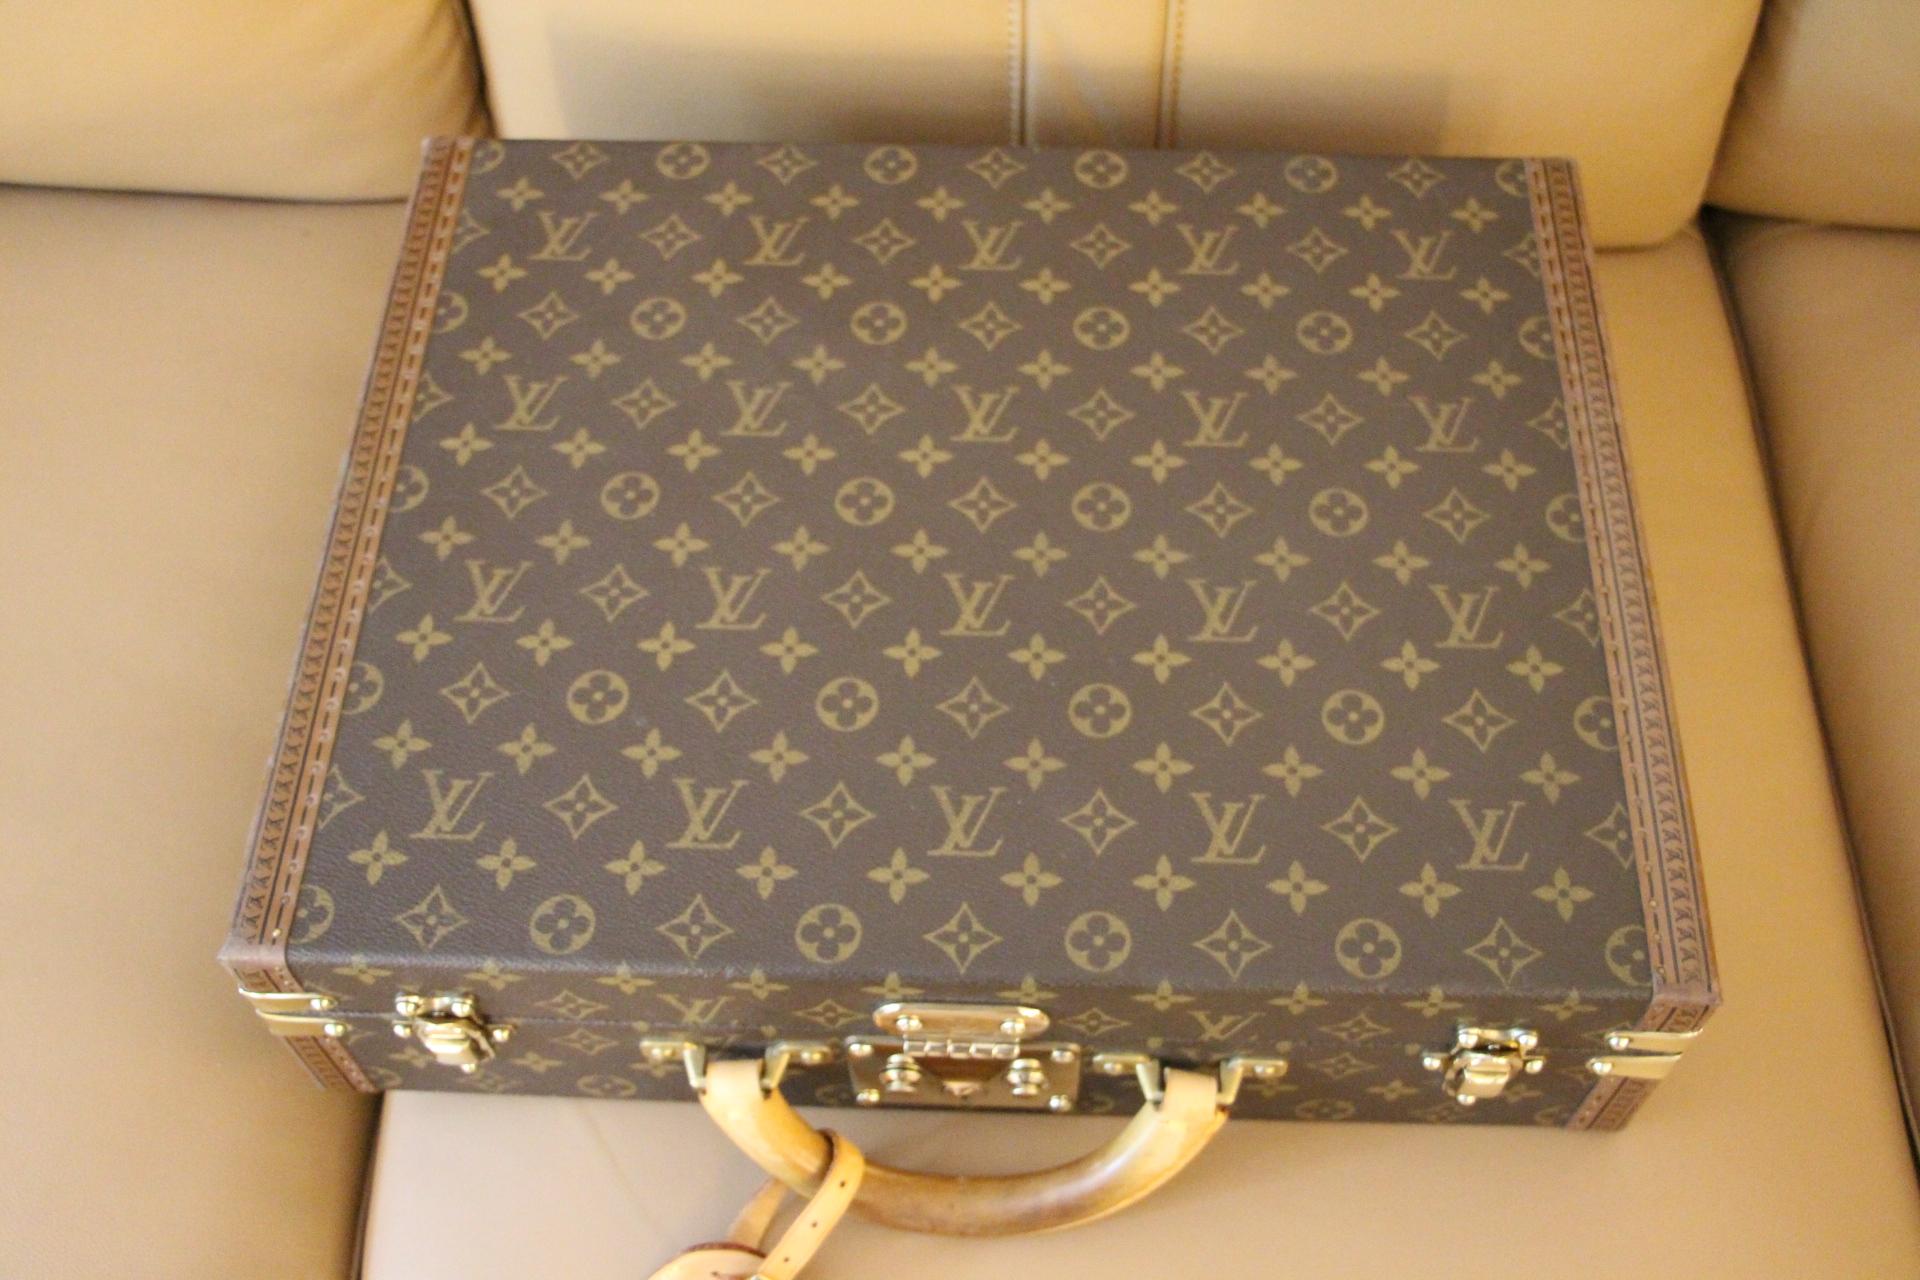 This elegant Louis Vuitton briefcase features monogram canvas and a large and comfortable leather handle. Closed by a solid brass lock, it is accompanied by two crafted brass trunk latches. Its trims are printed with the LV logo all around.
Its